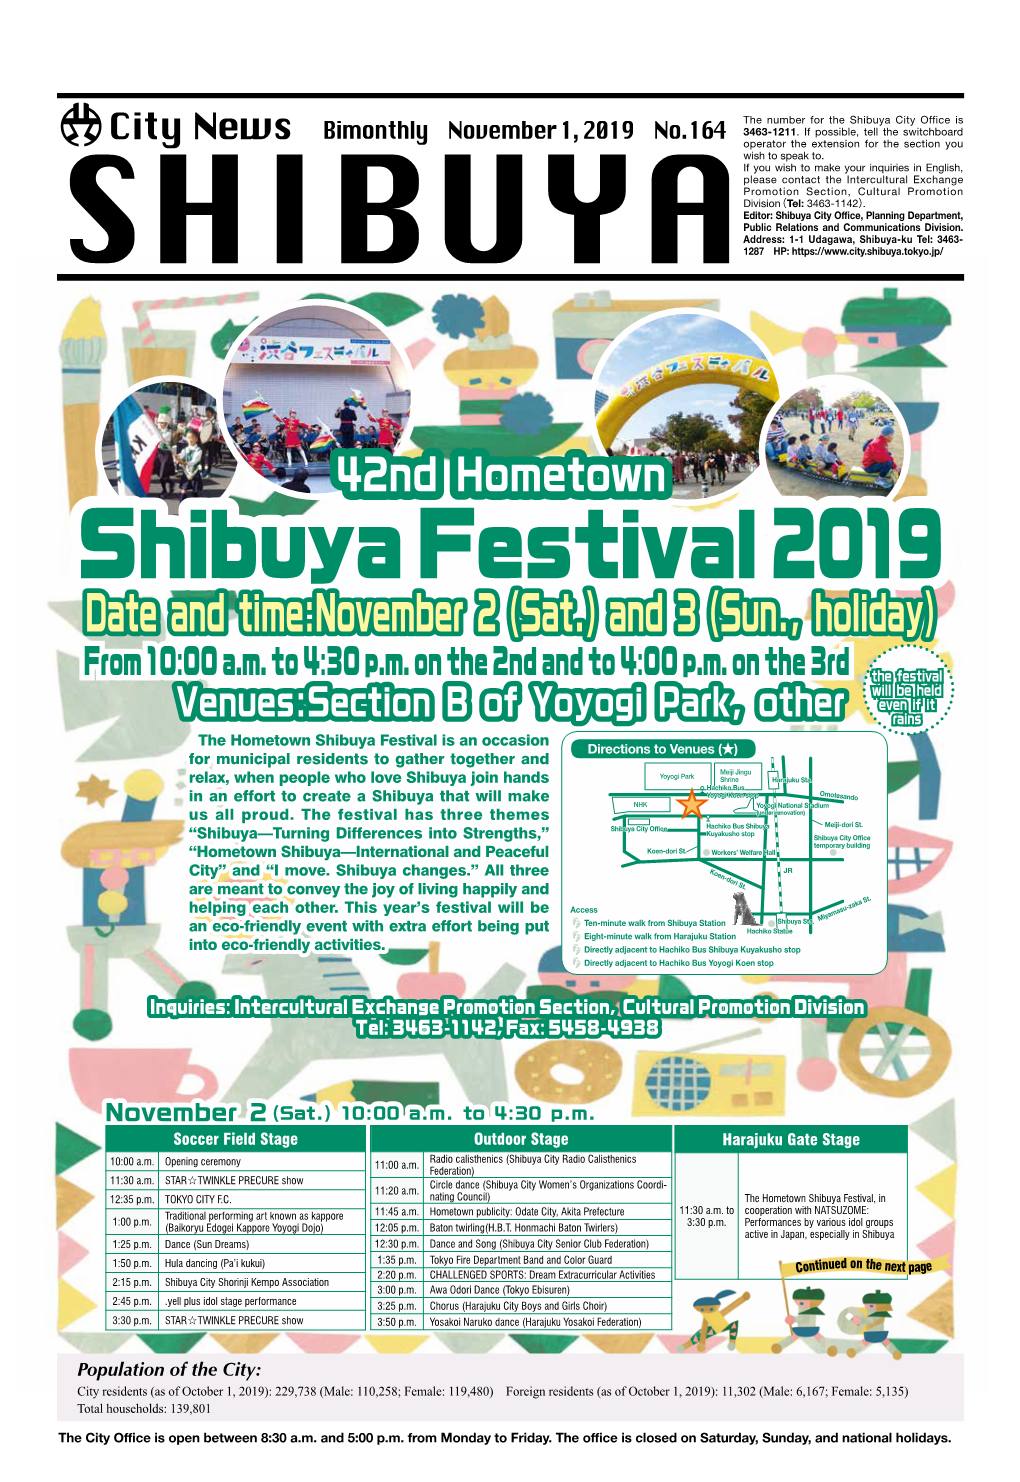 Shibuya Festival 2019 Date and Time:November 2 (Sat.) and 3 (Sun., Holiday)